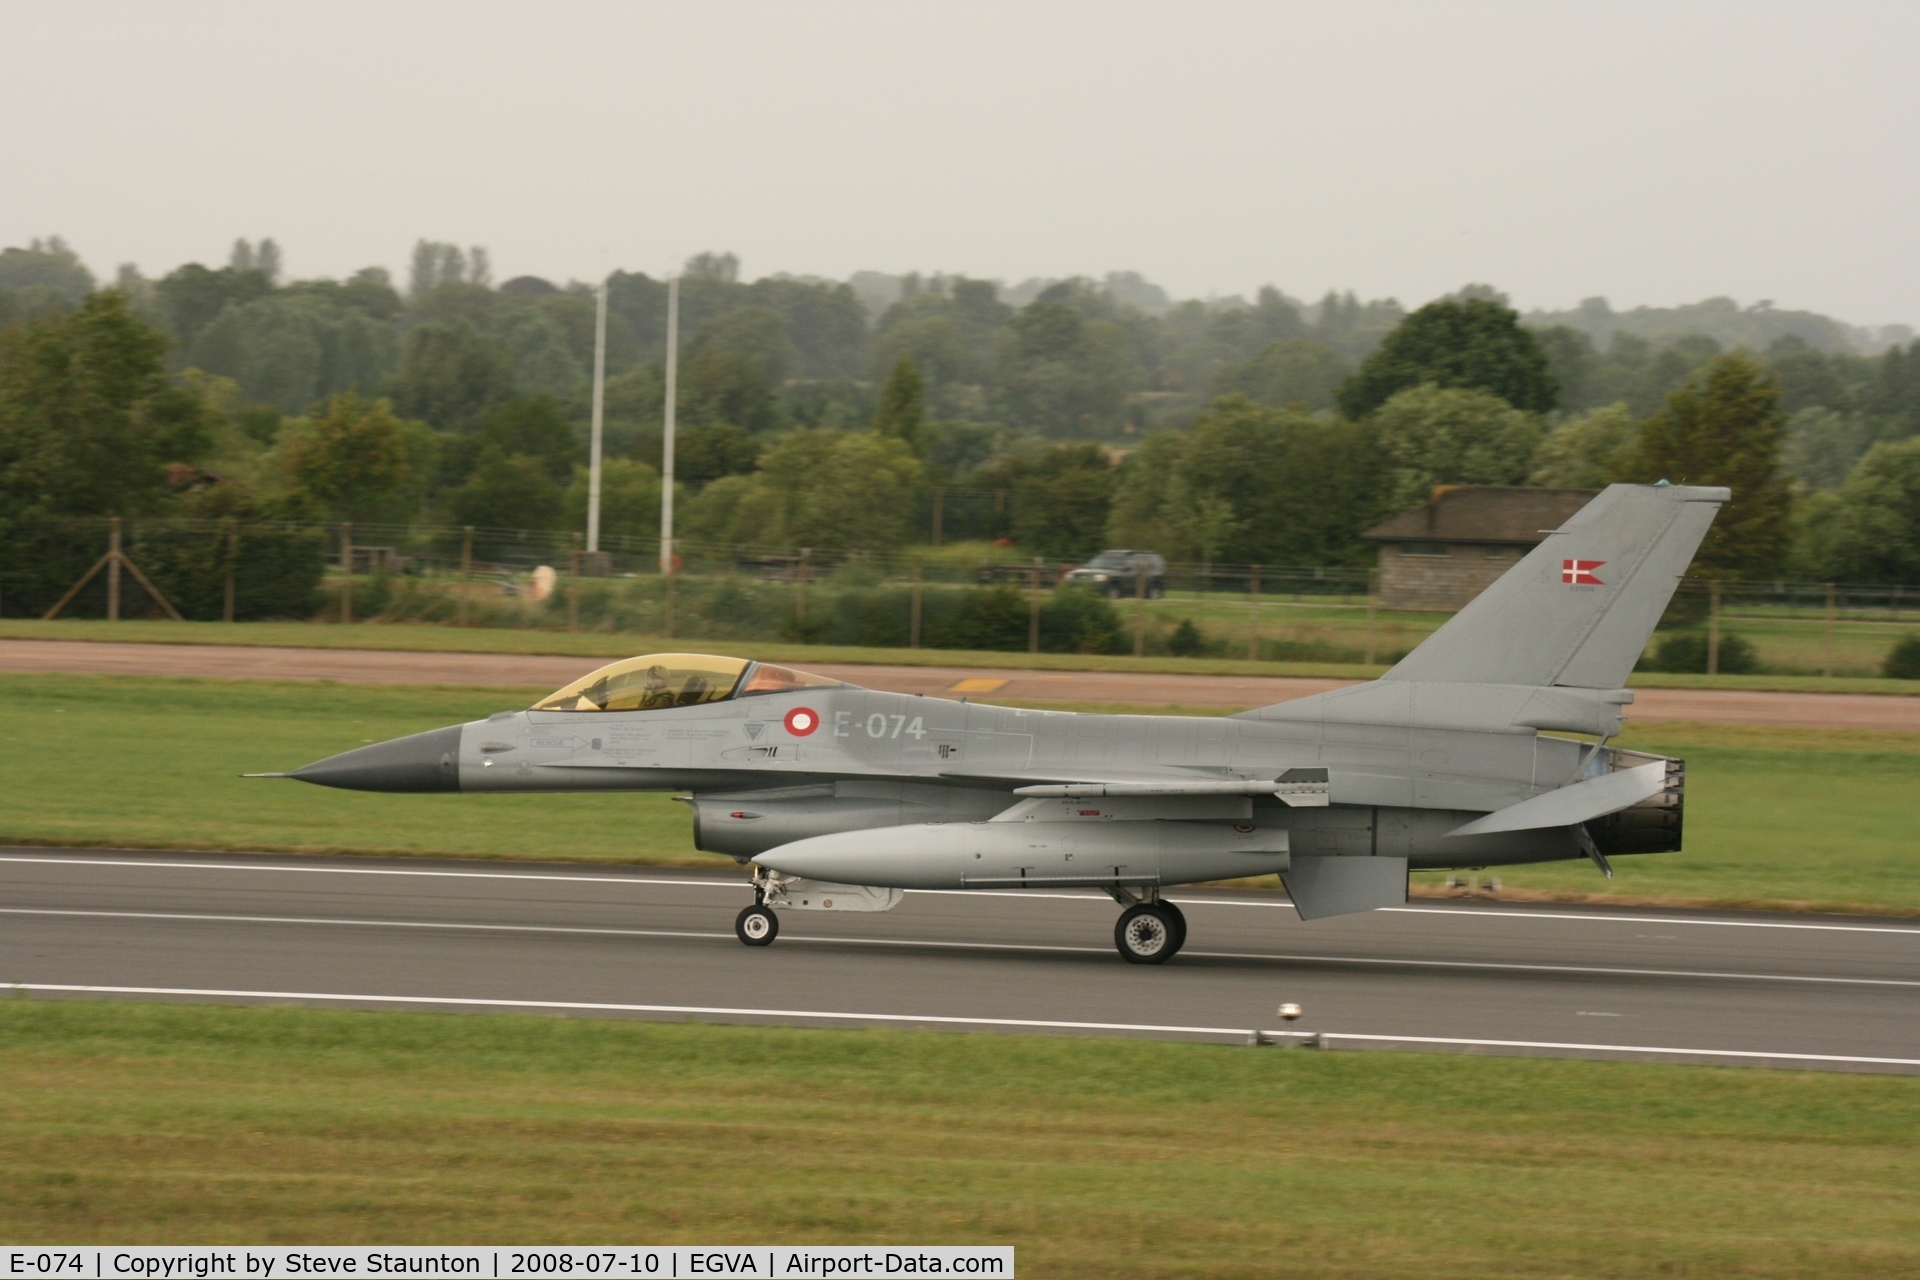 E-074, General Dynamics F-16AM Fighting Falcon C/N 61-627, Taken at the Royal International Air Tattoo 2008 during arrivals and departures (show days cancelled due to bad weather)